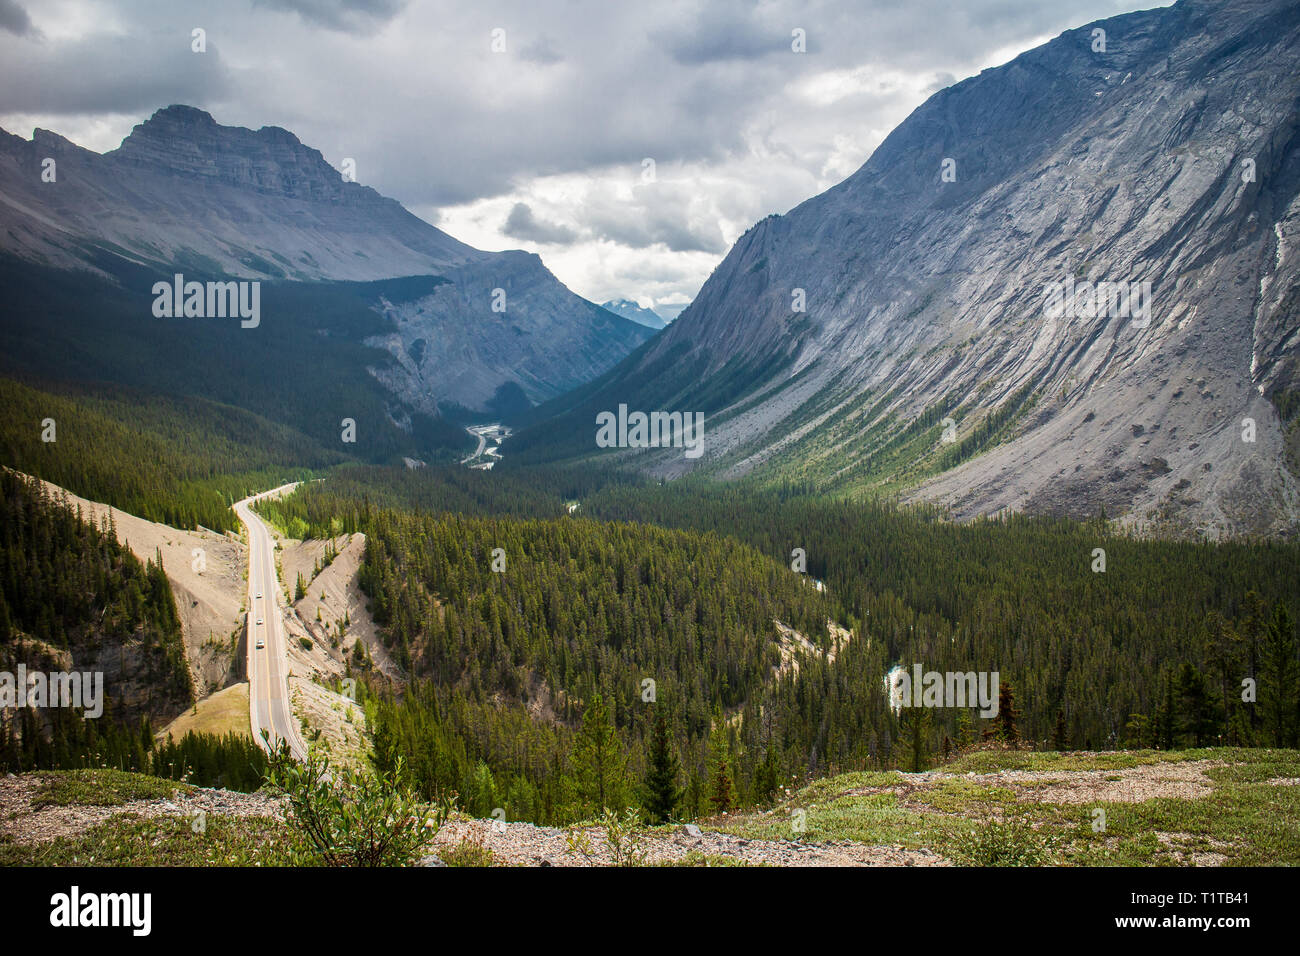 View of Route 93 Icefield Parkway road near Cirrus Mountain British Columbia Canada. Vehicles in distance Stock Photo